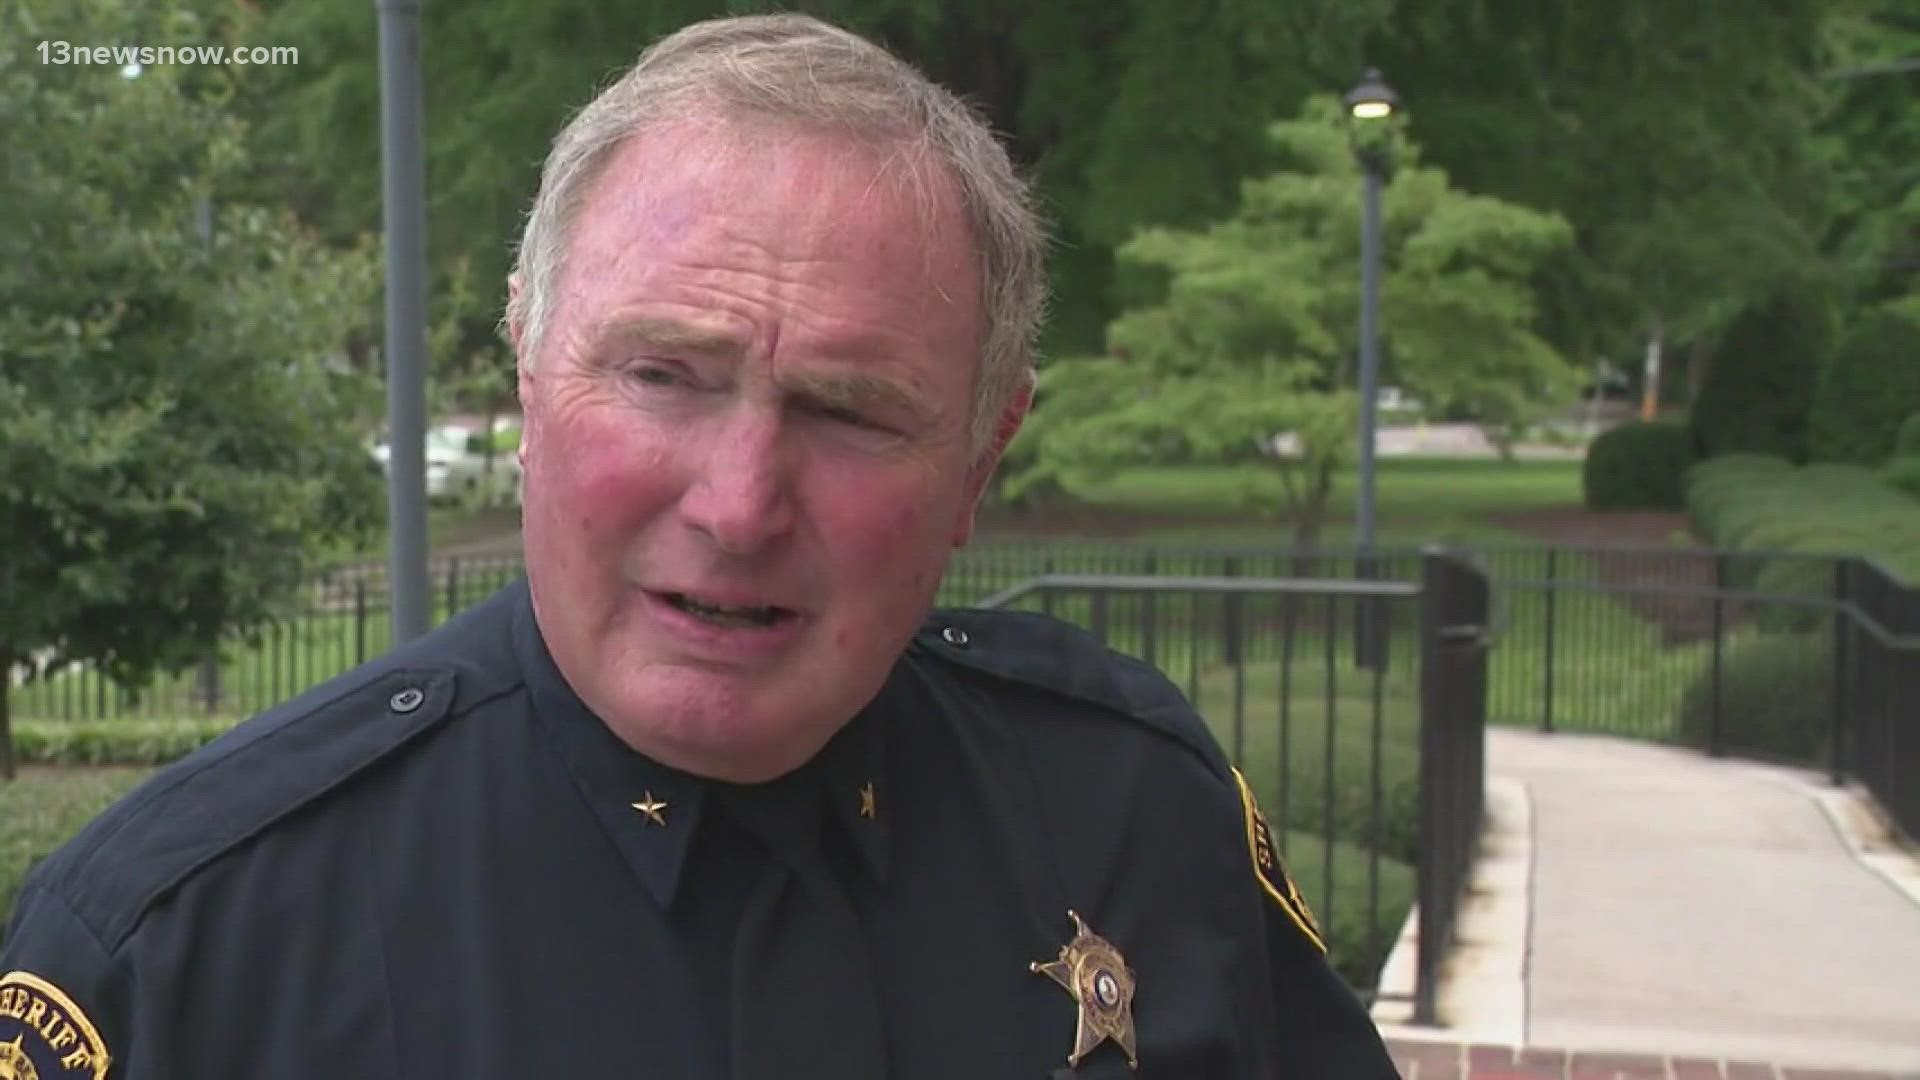 The Virginia Beach Sheriff wants his deputies to get paid more, so they can make the same amount as police officers.